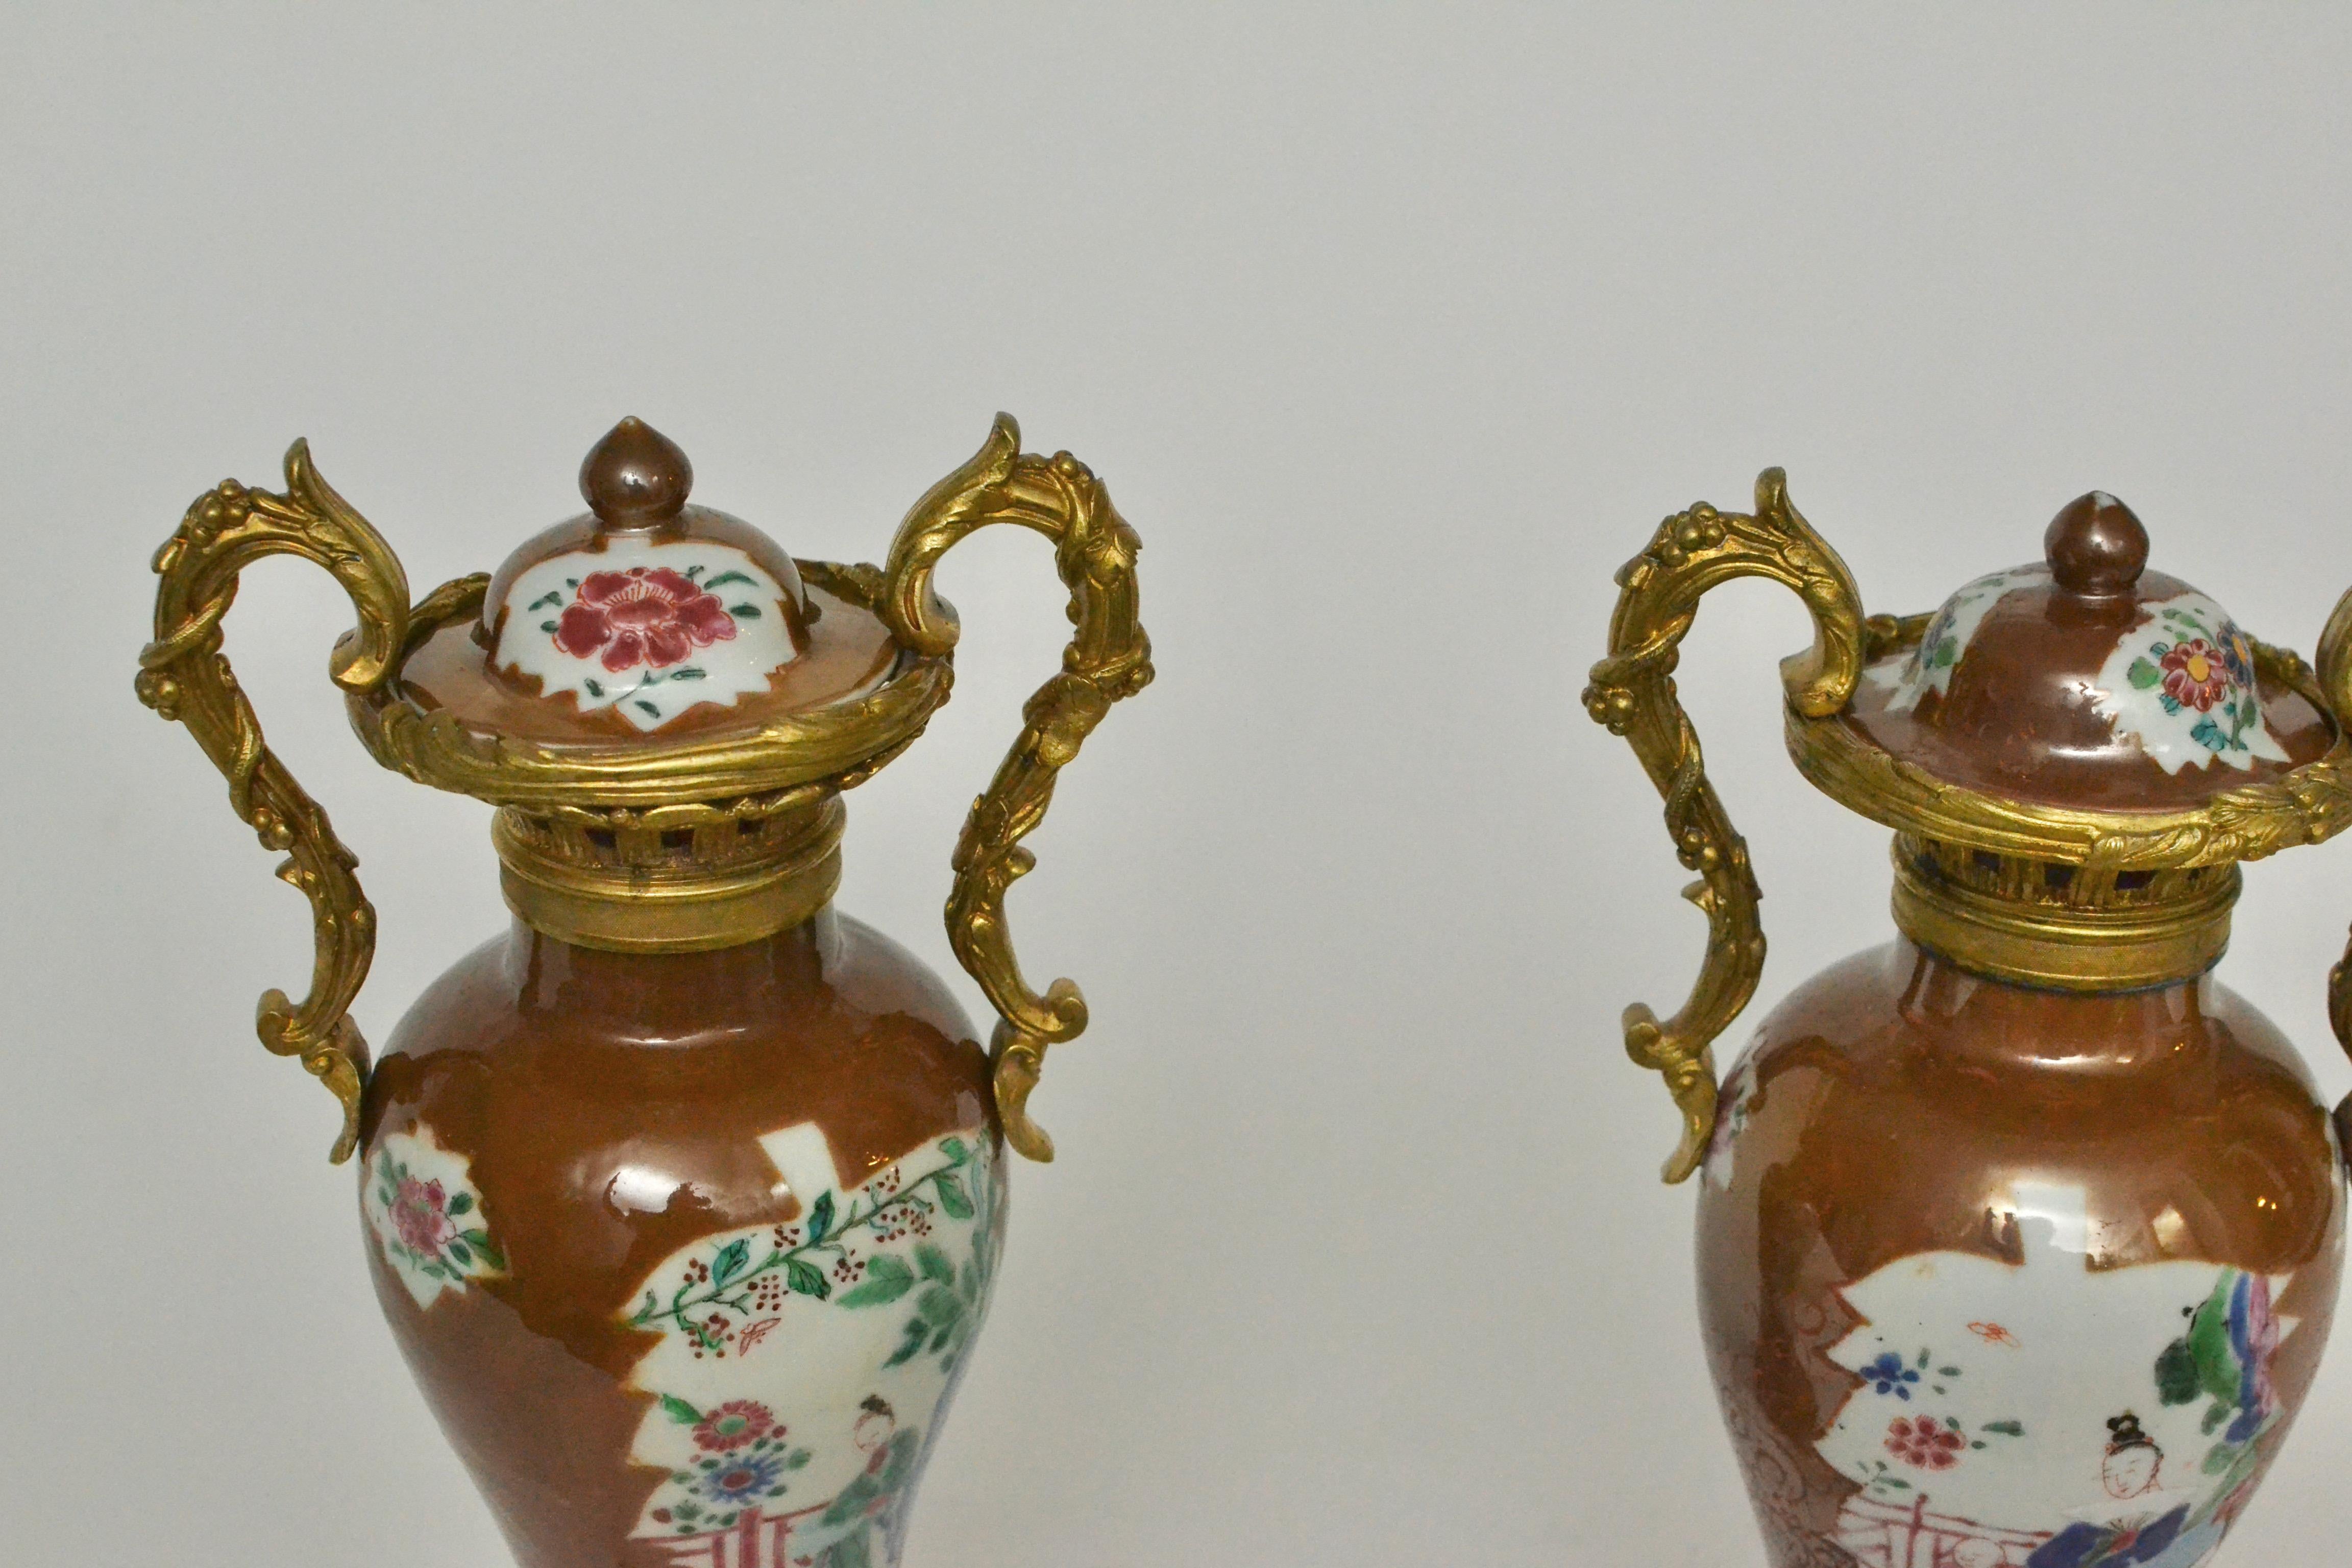 Pair of Chinese Ormolu Mounted Porcelain Vases, 18th Century 2